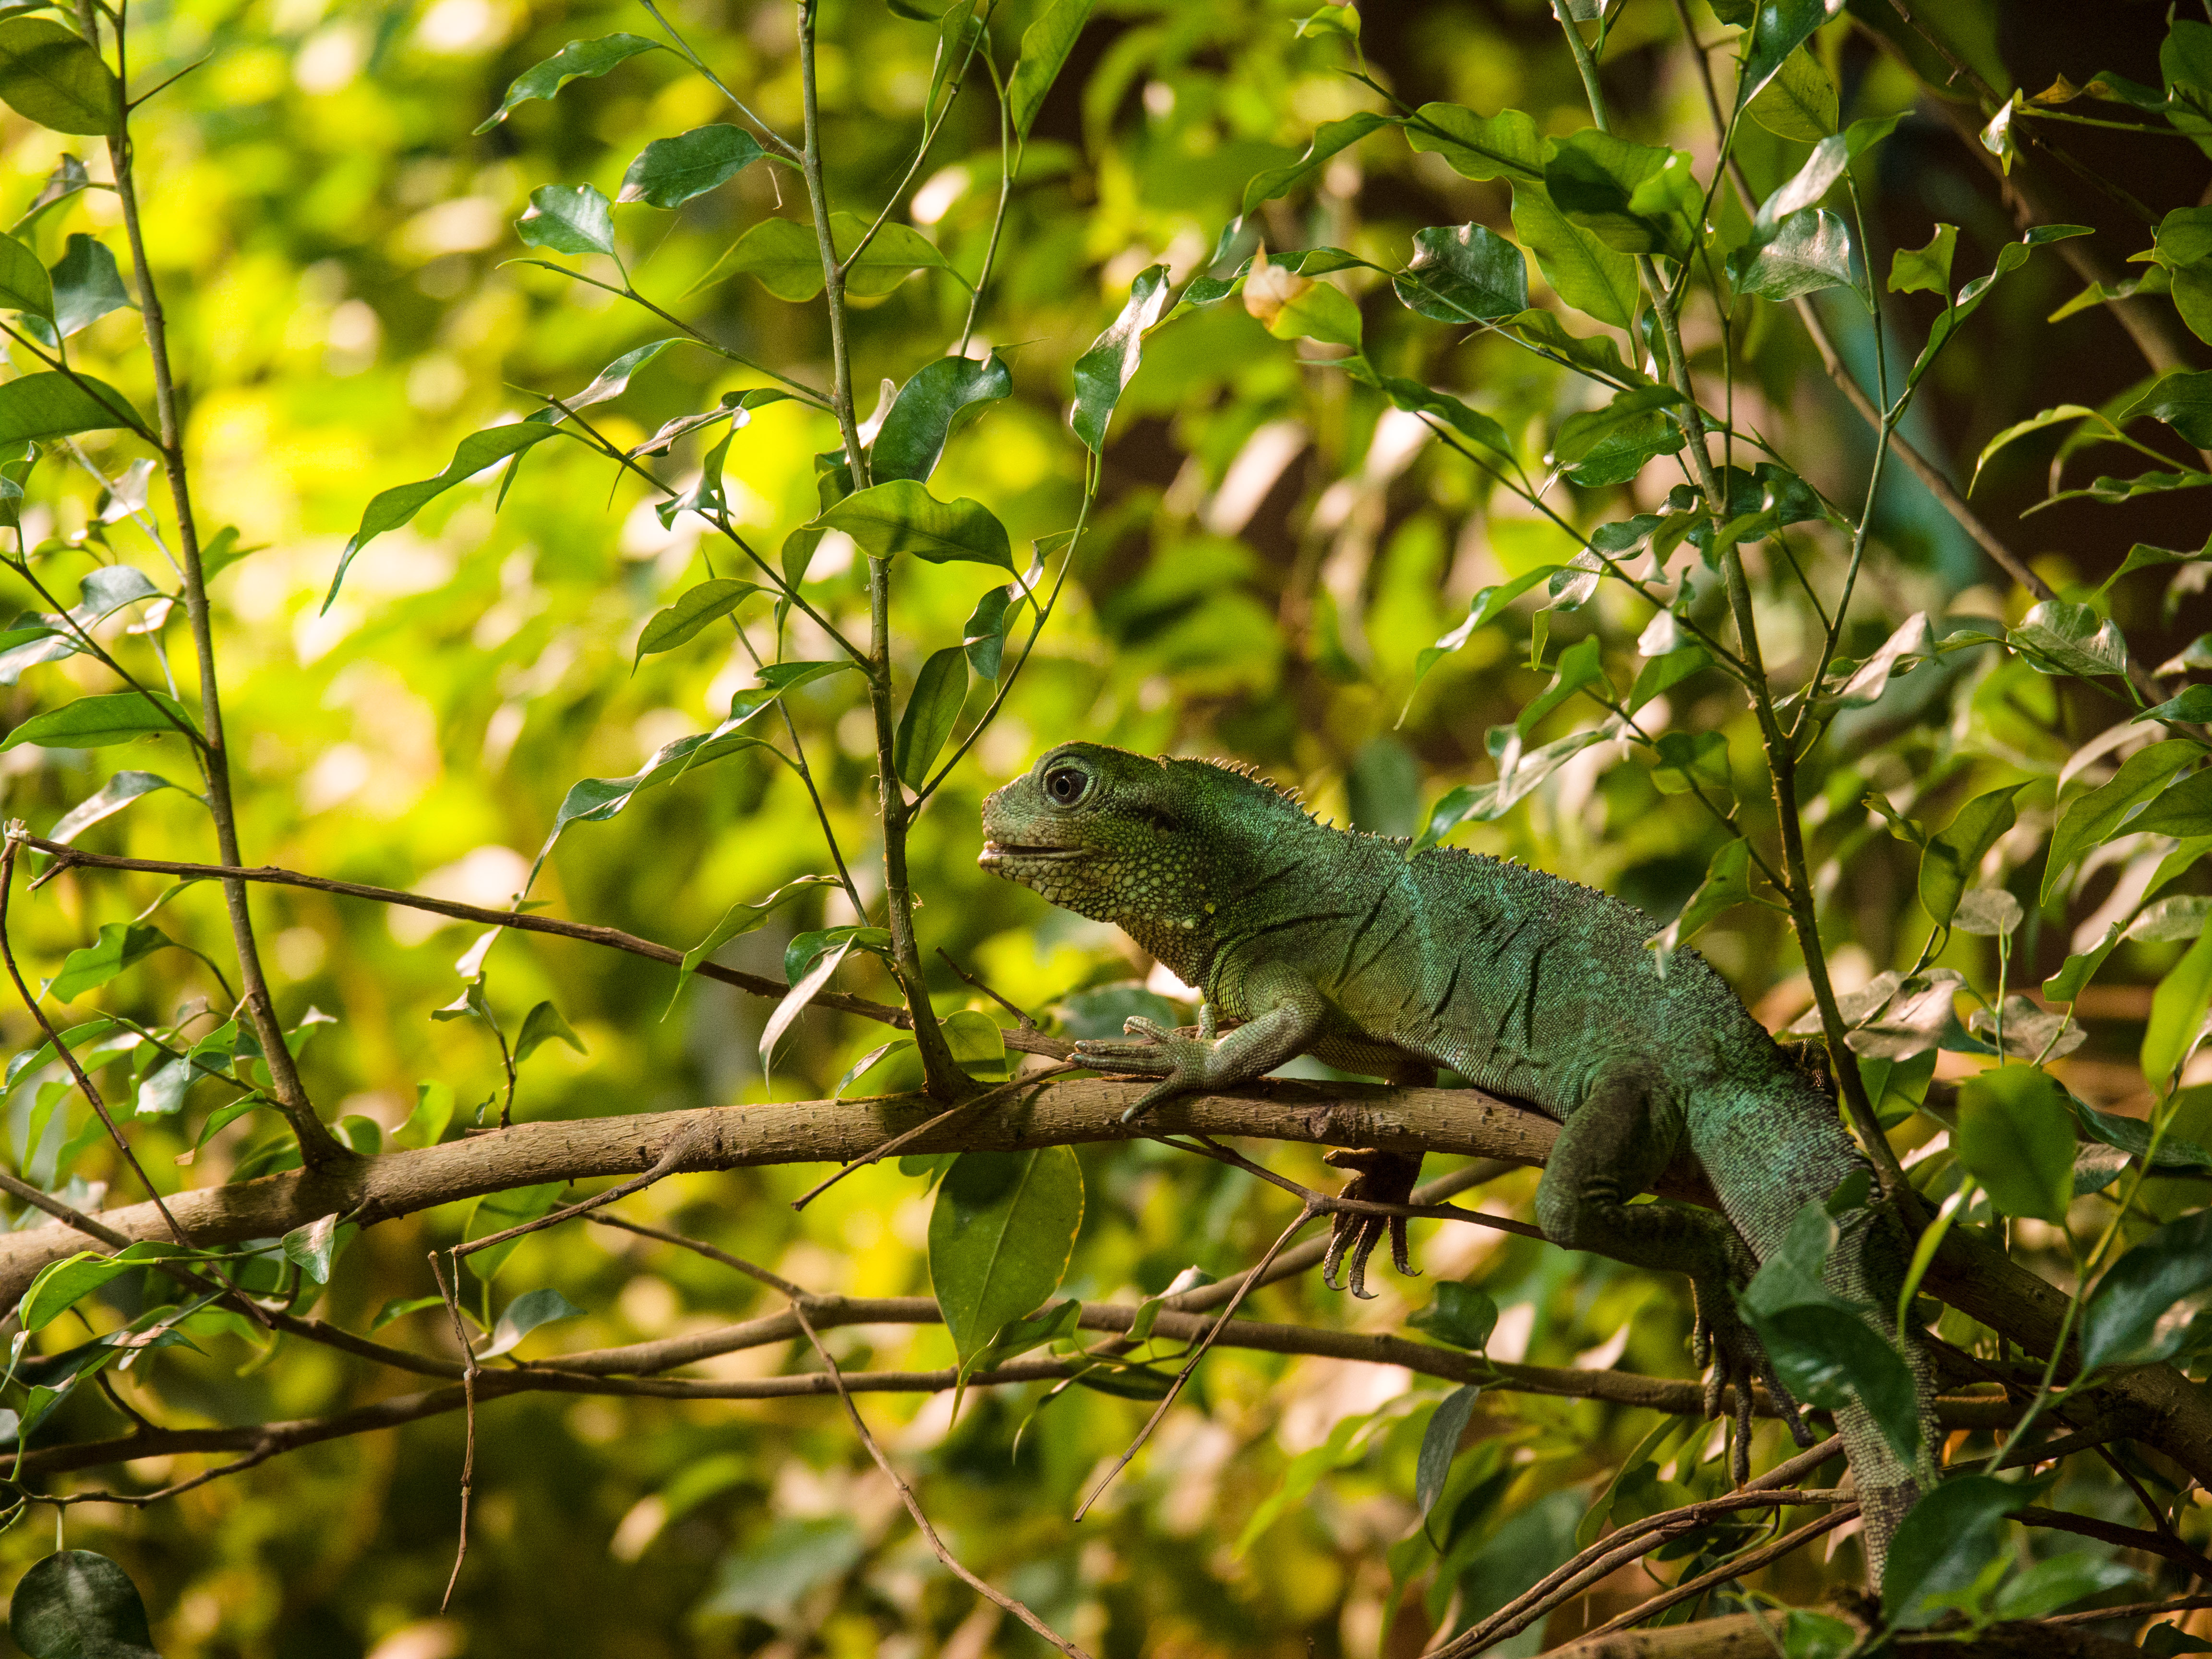 Lizard Reptile Leaves Branches Green